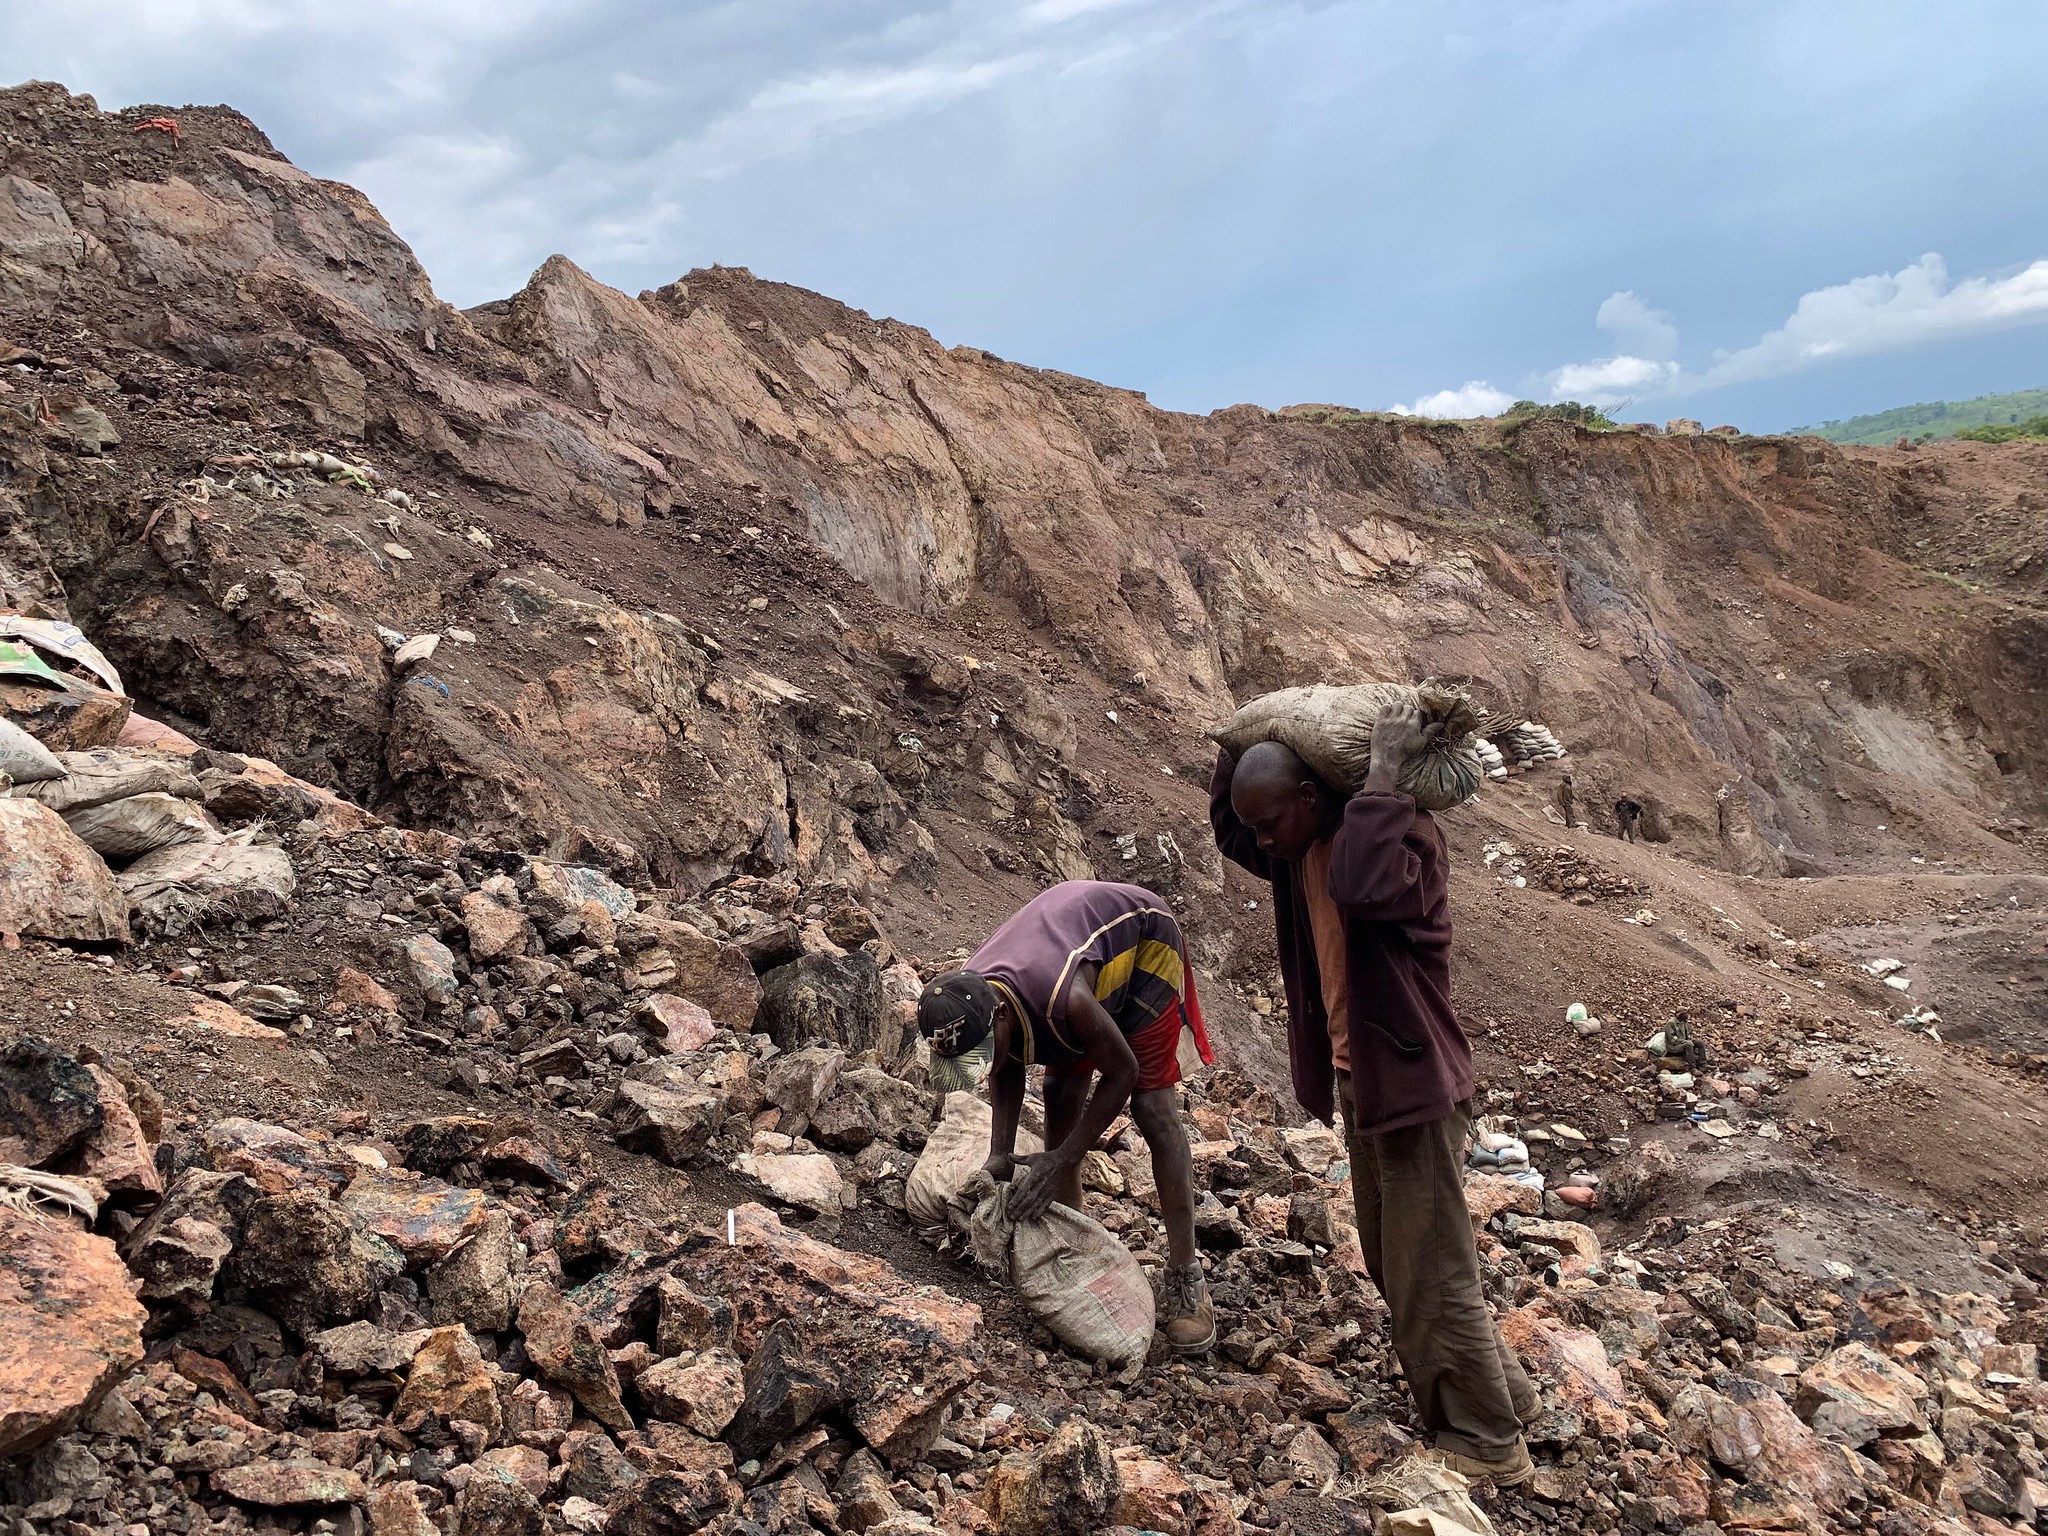 Artisal Cobalt Miners in the Congo. “Artisanal Cobalt Mining” by the International Institute for Environment and Development Photostream under C.C. B-NC-ND 20.